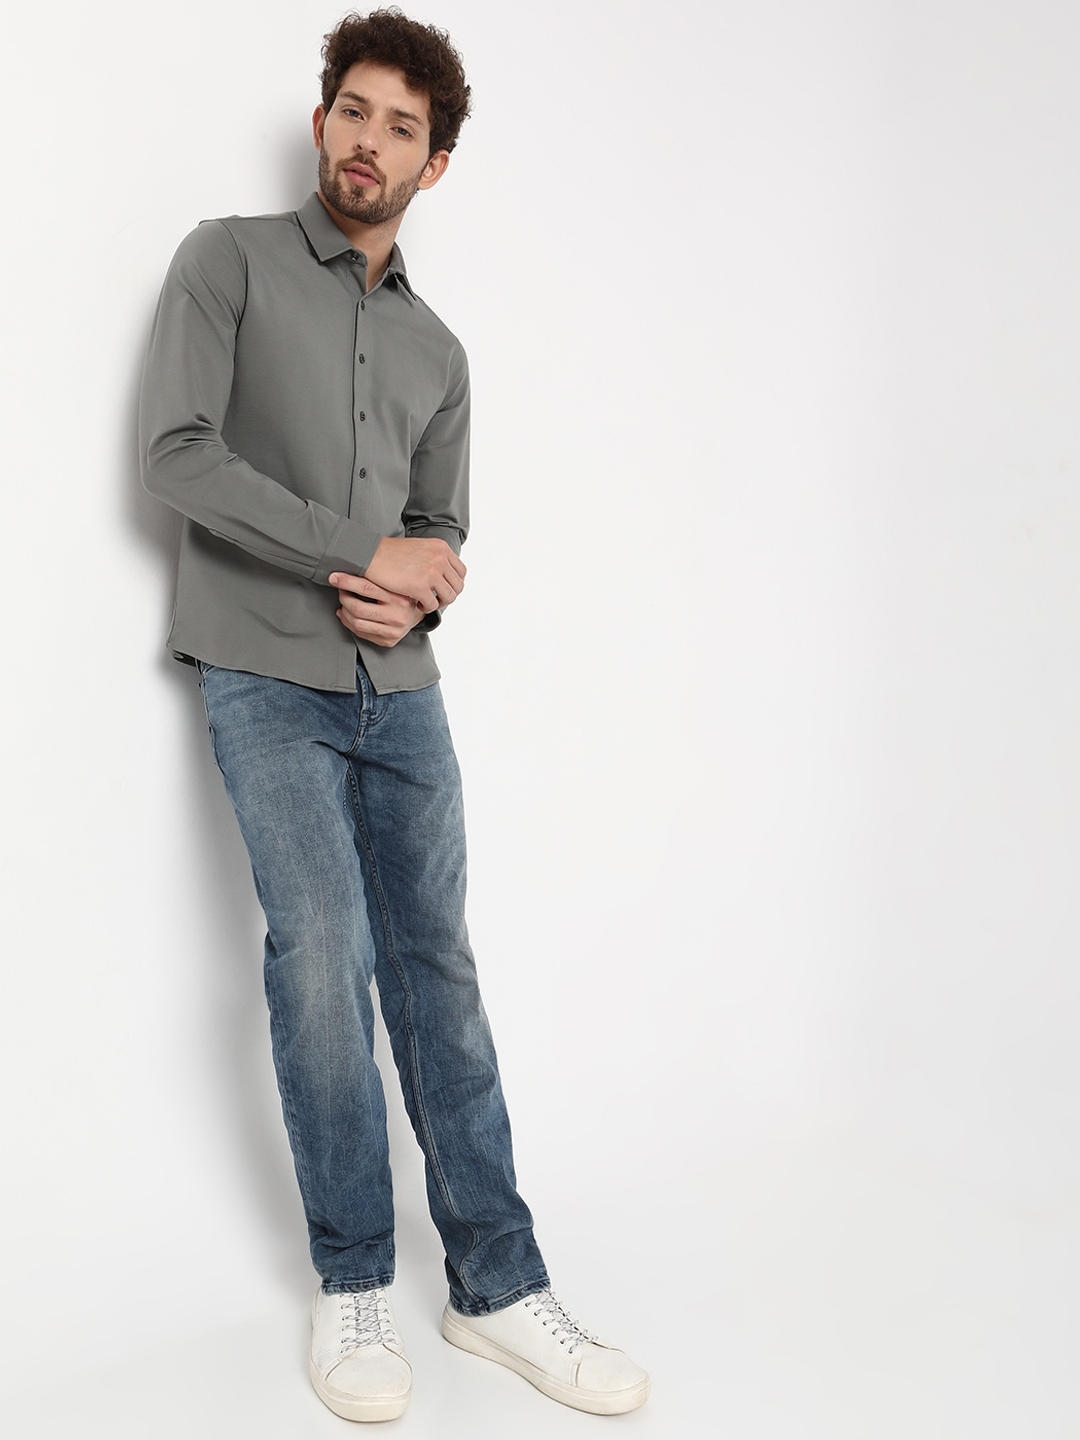 Men's S.DET KNIT IN Casual Shirt